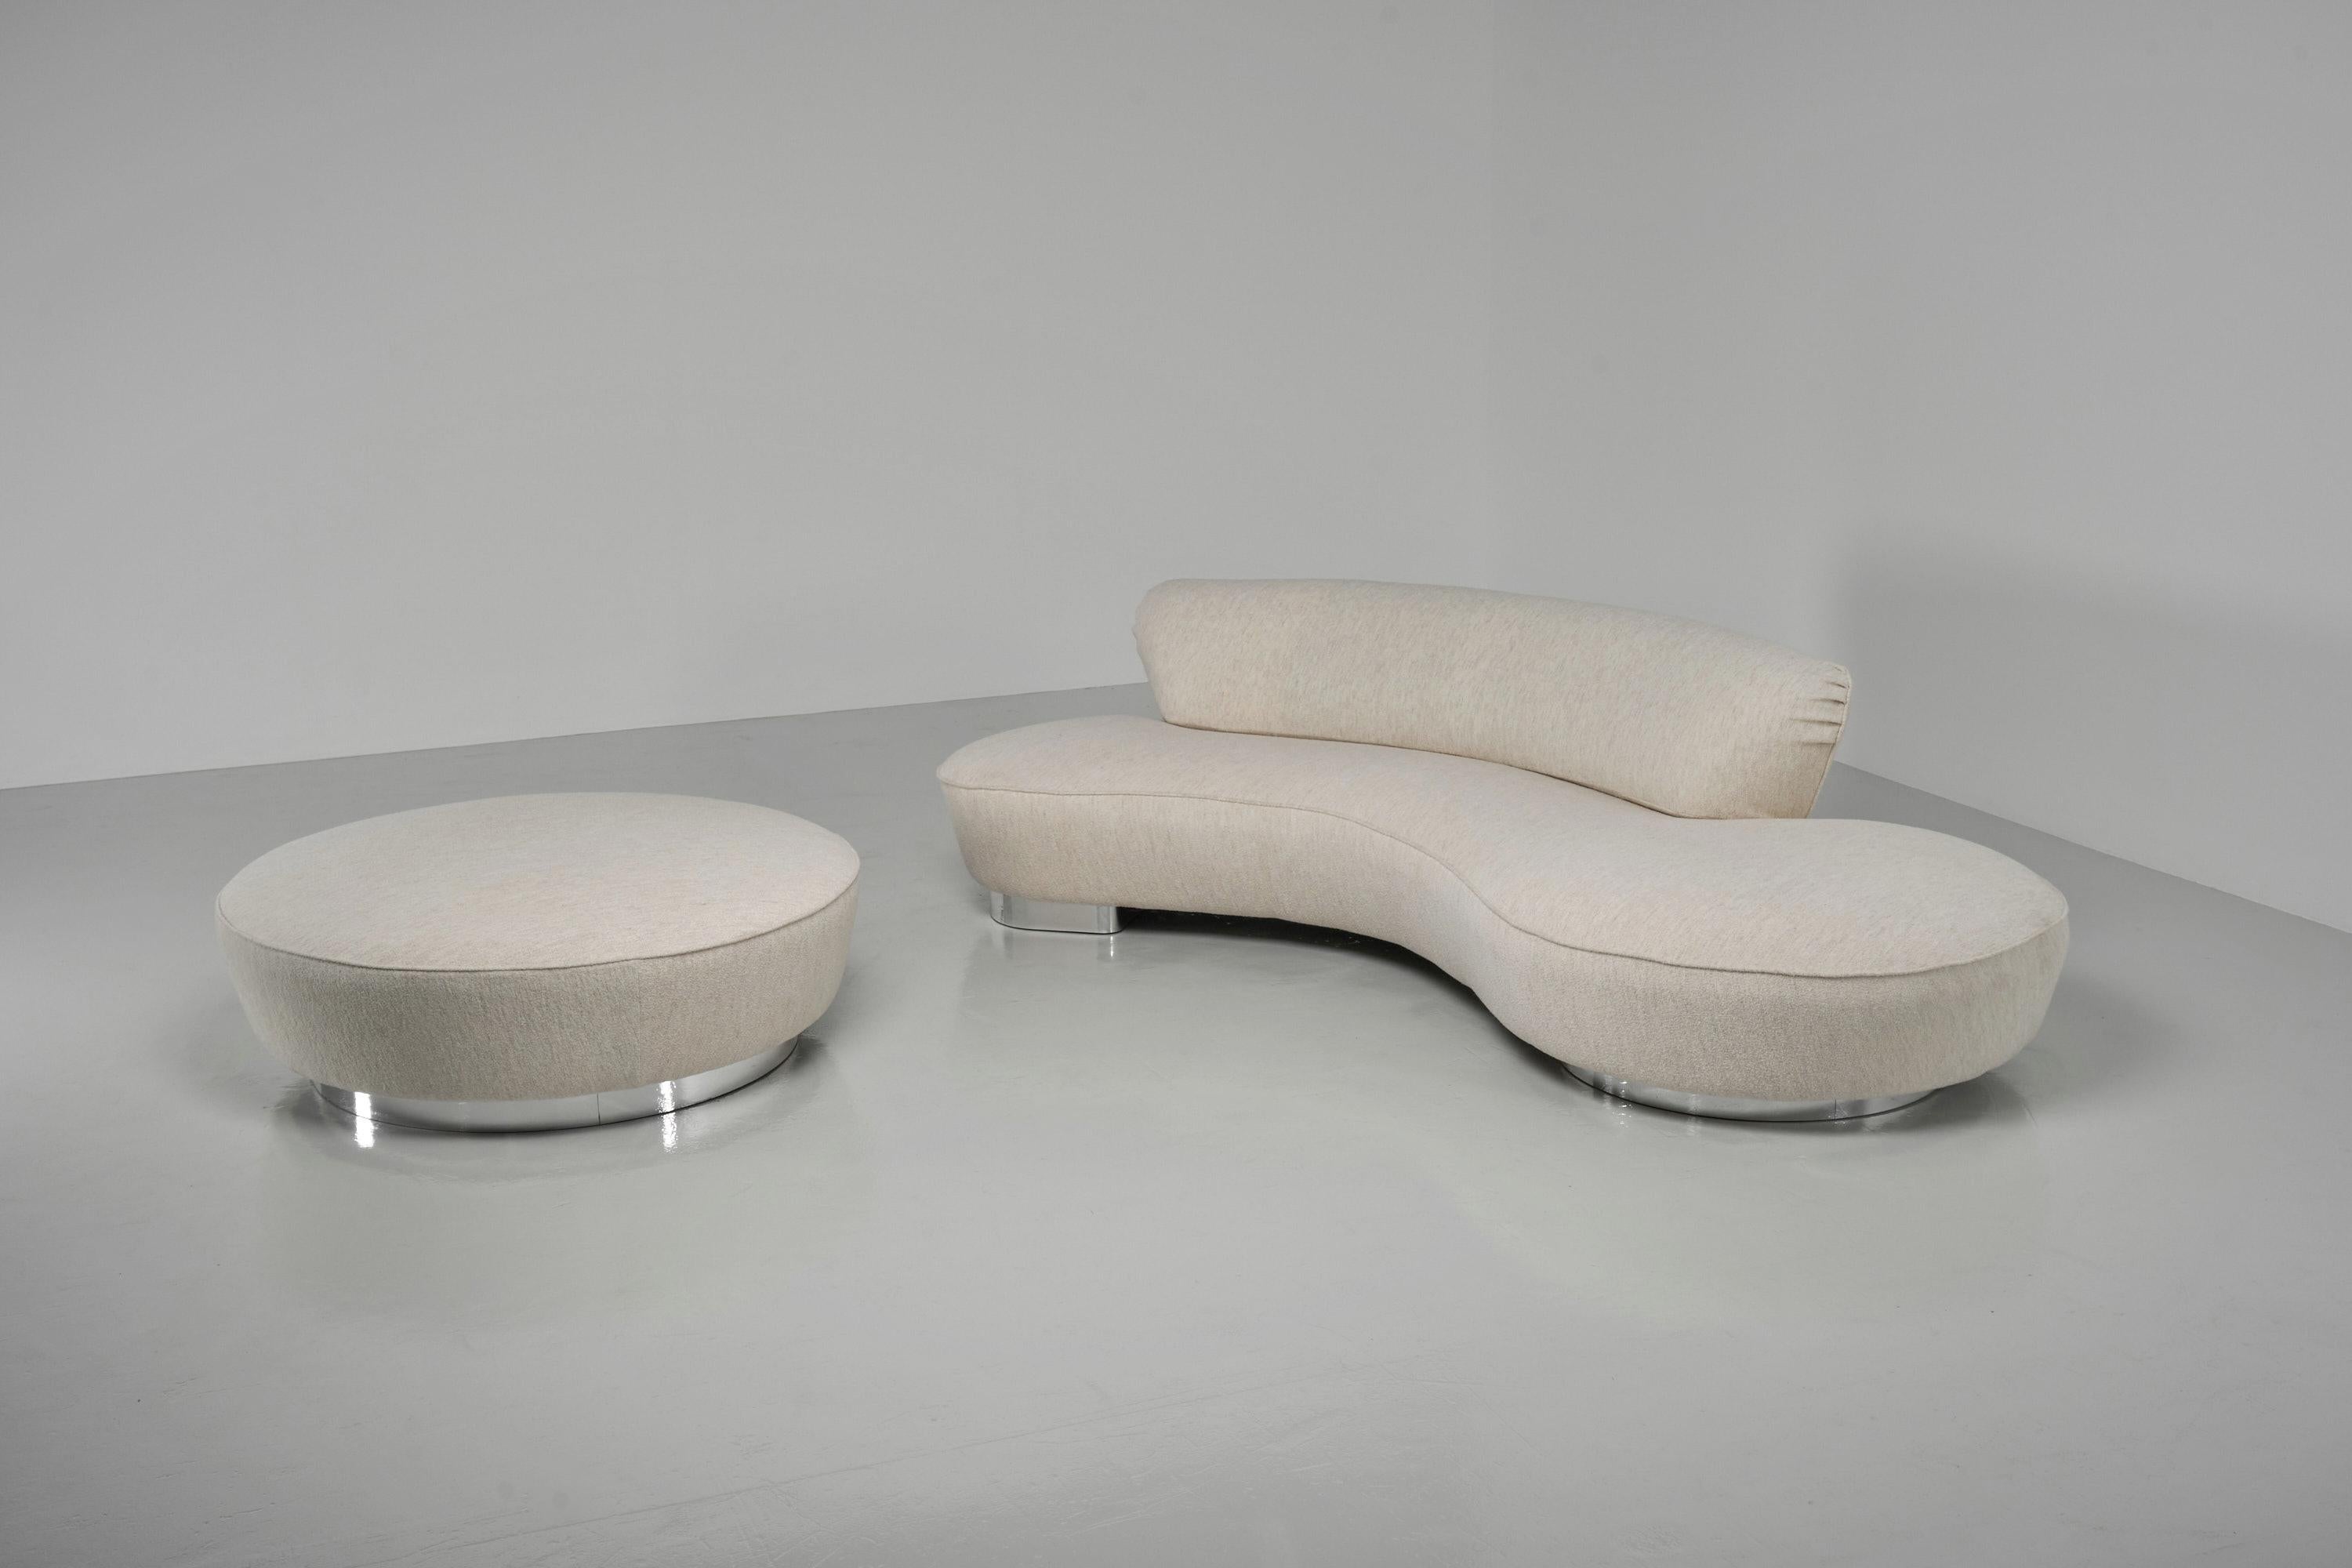 Very nice large and iconic sculptural lounge sofa and poof designed by Vladimir Kagan and manufactured by Directional, United States 1999. This boomerang shaped sofa is also called cloud sofa sometimes, well with this cloudy fabric we totally feel